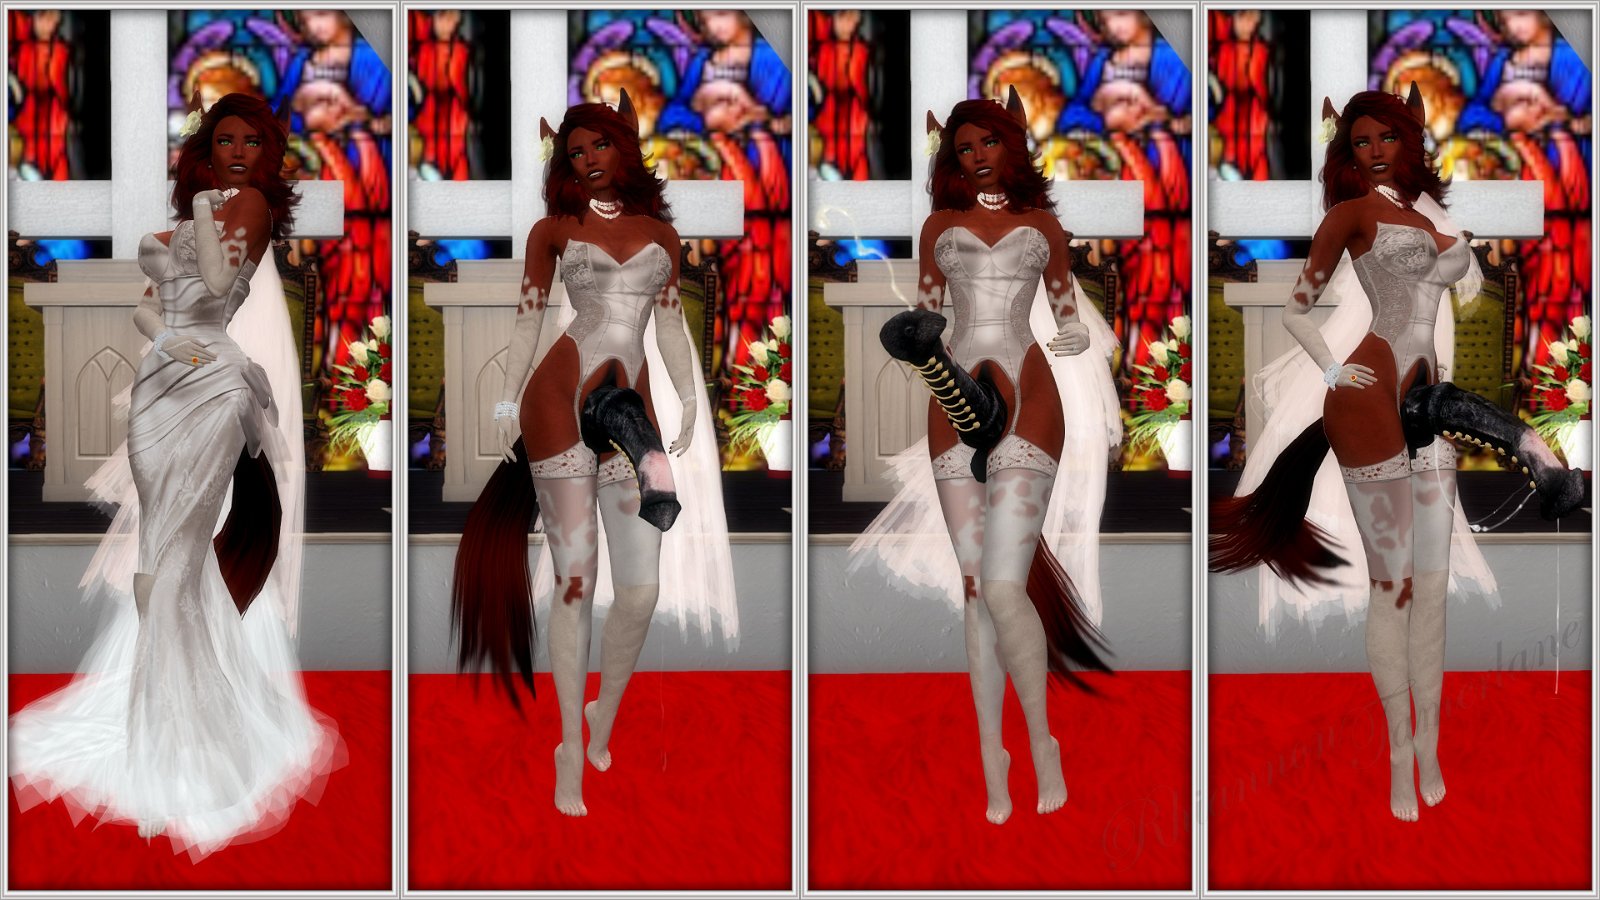 Photo by Rhiannon with the username @Rhiannon,  December 21, 2018 at 3:54 PM and the text says 'Spring 2017 again, this time a wedding.
#second_life #3d #porn #horsecock #wedding #church'